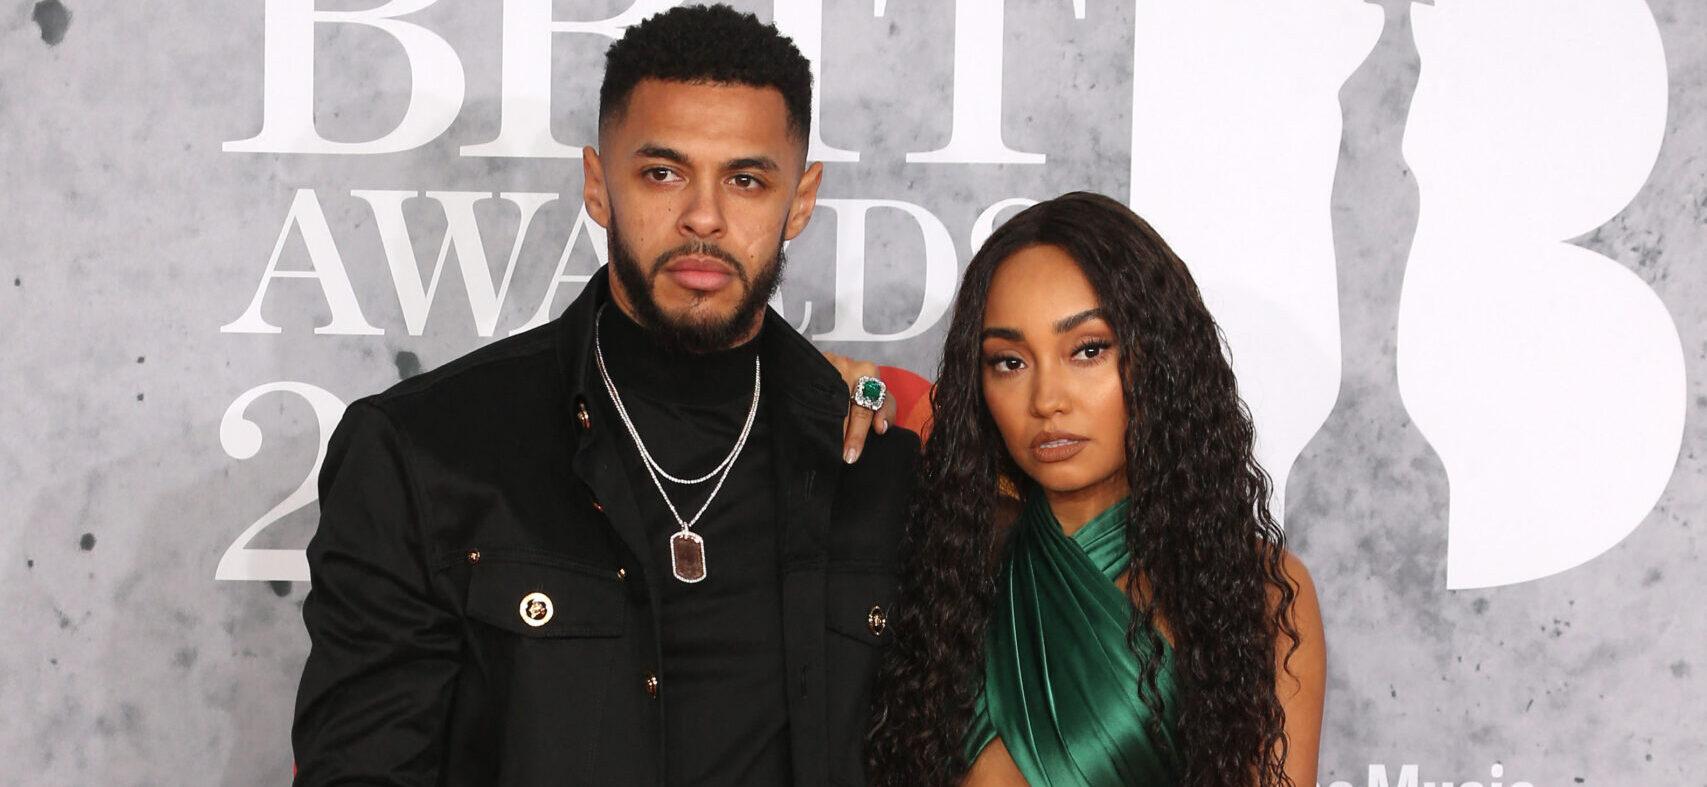 Little Mix's Leigh-Anne Pinnock Ties The Knot With Her Footballer Beau Andre Gray